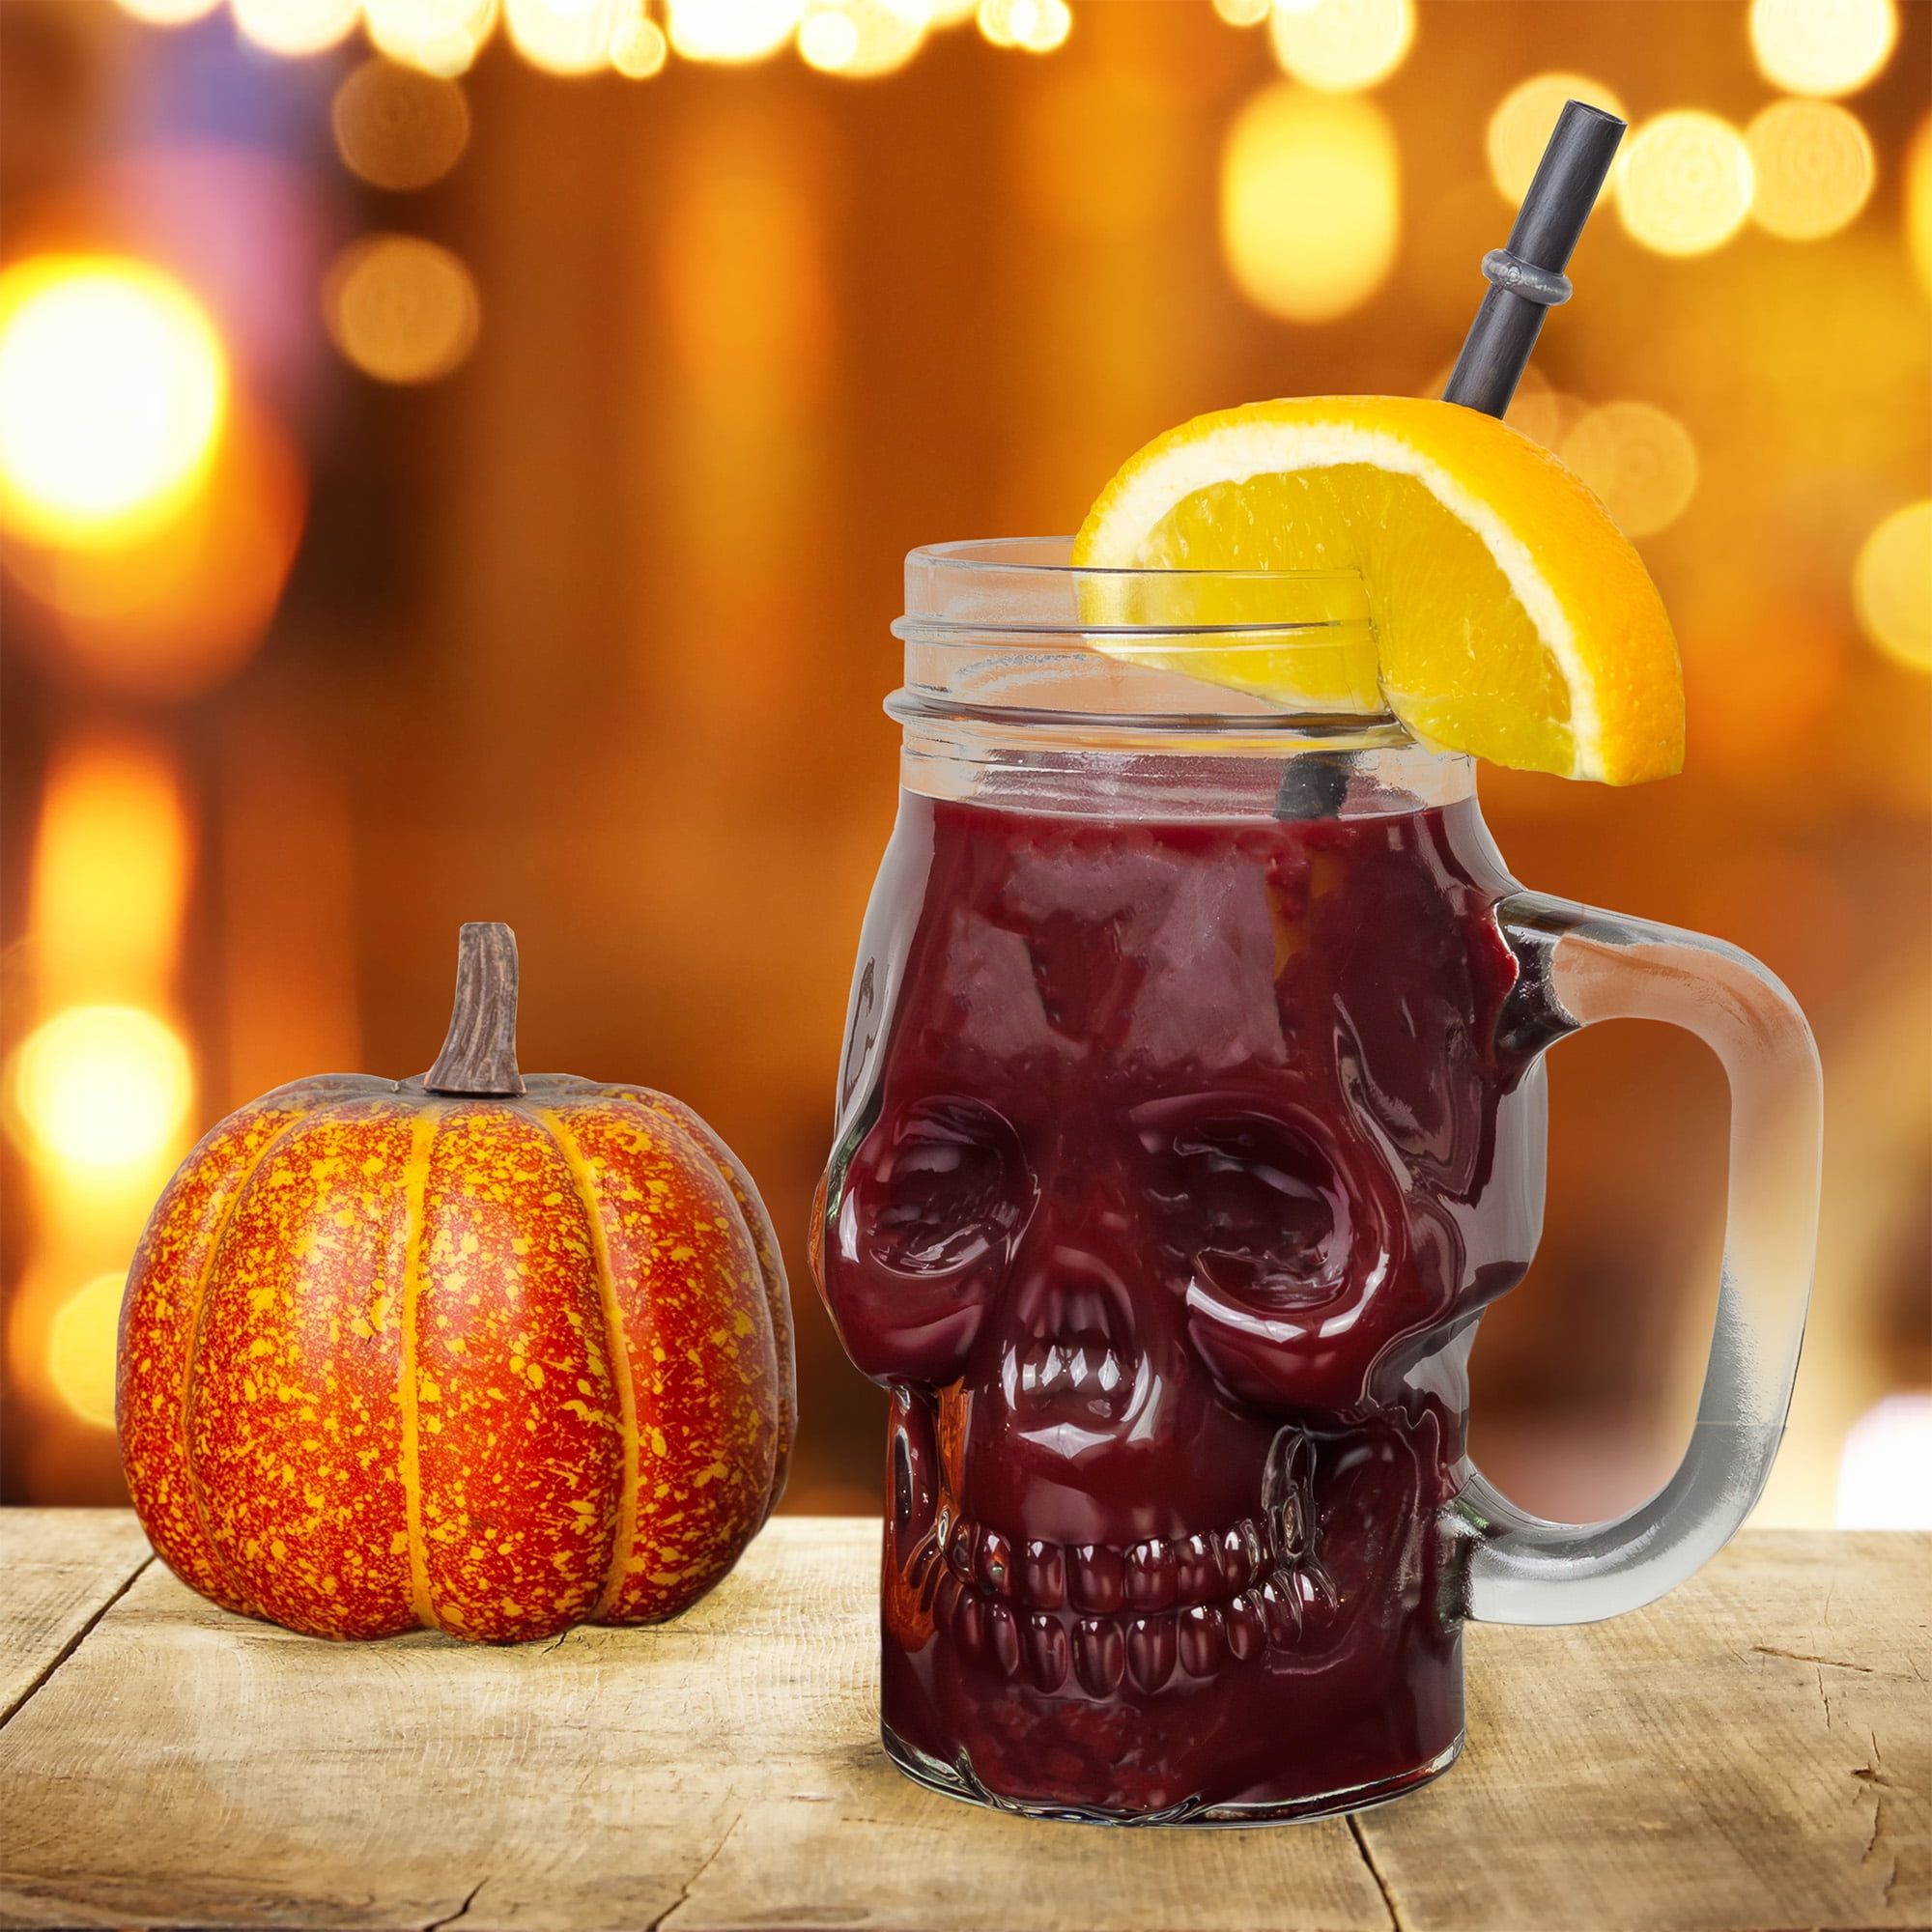 Way To Celebrate Glass Skull Sipper with Lid and Straw, Orange, 18 oz 